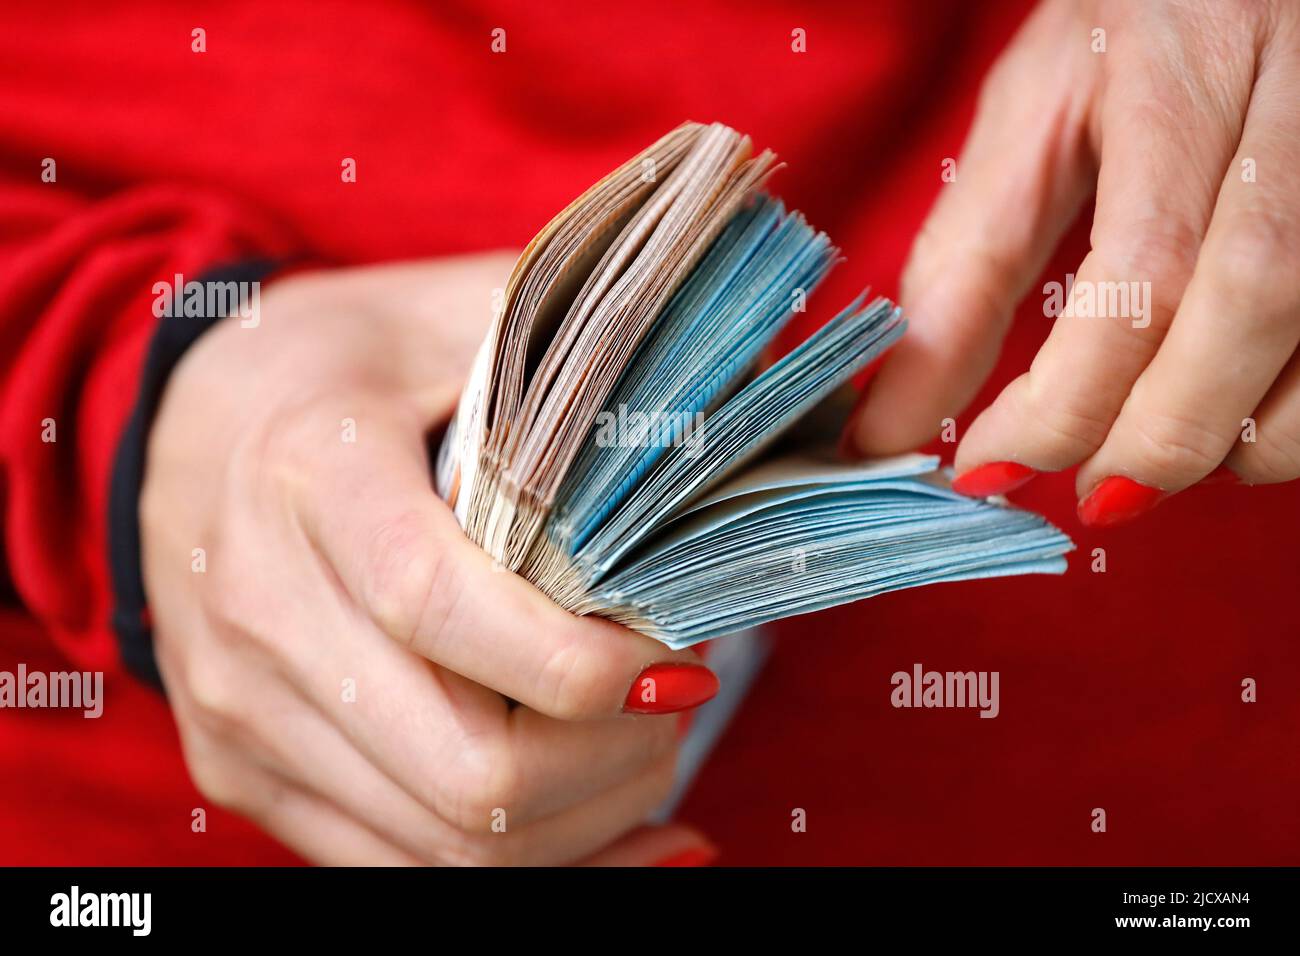 Female hand with a lot of euro banknotes, concept of wealth, success, greed and corruption, lust for money, France, Europe Stock Photo